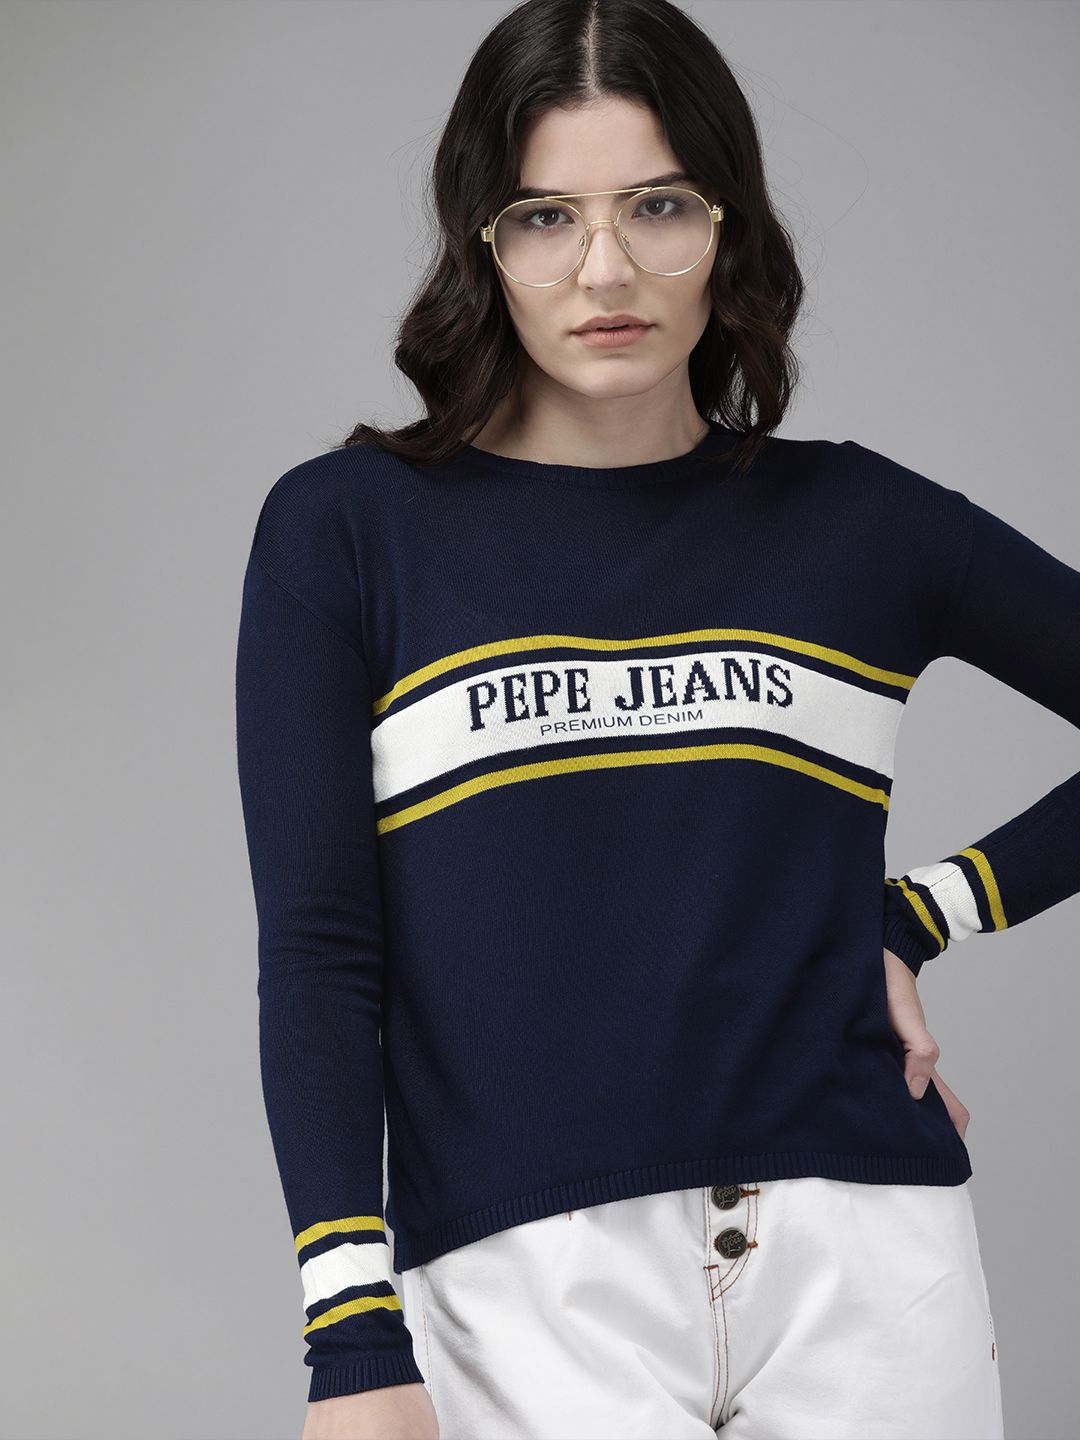 Pepe Jeans Women Navy Blue Typography Printed Round-Neck Pullover Sweater Price in India